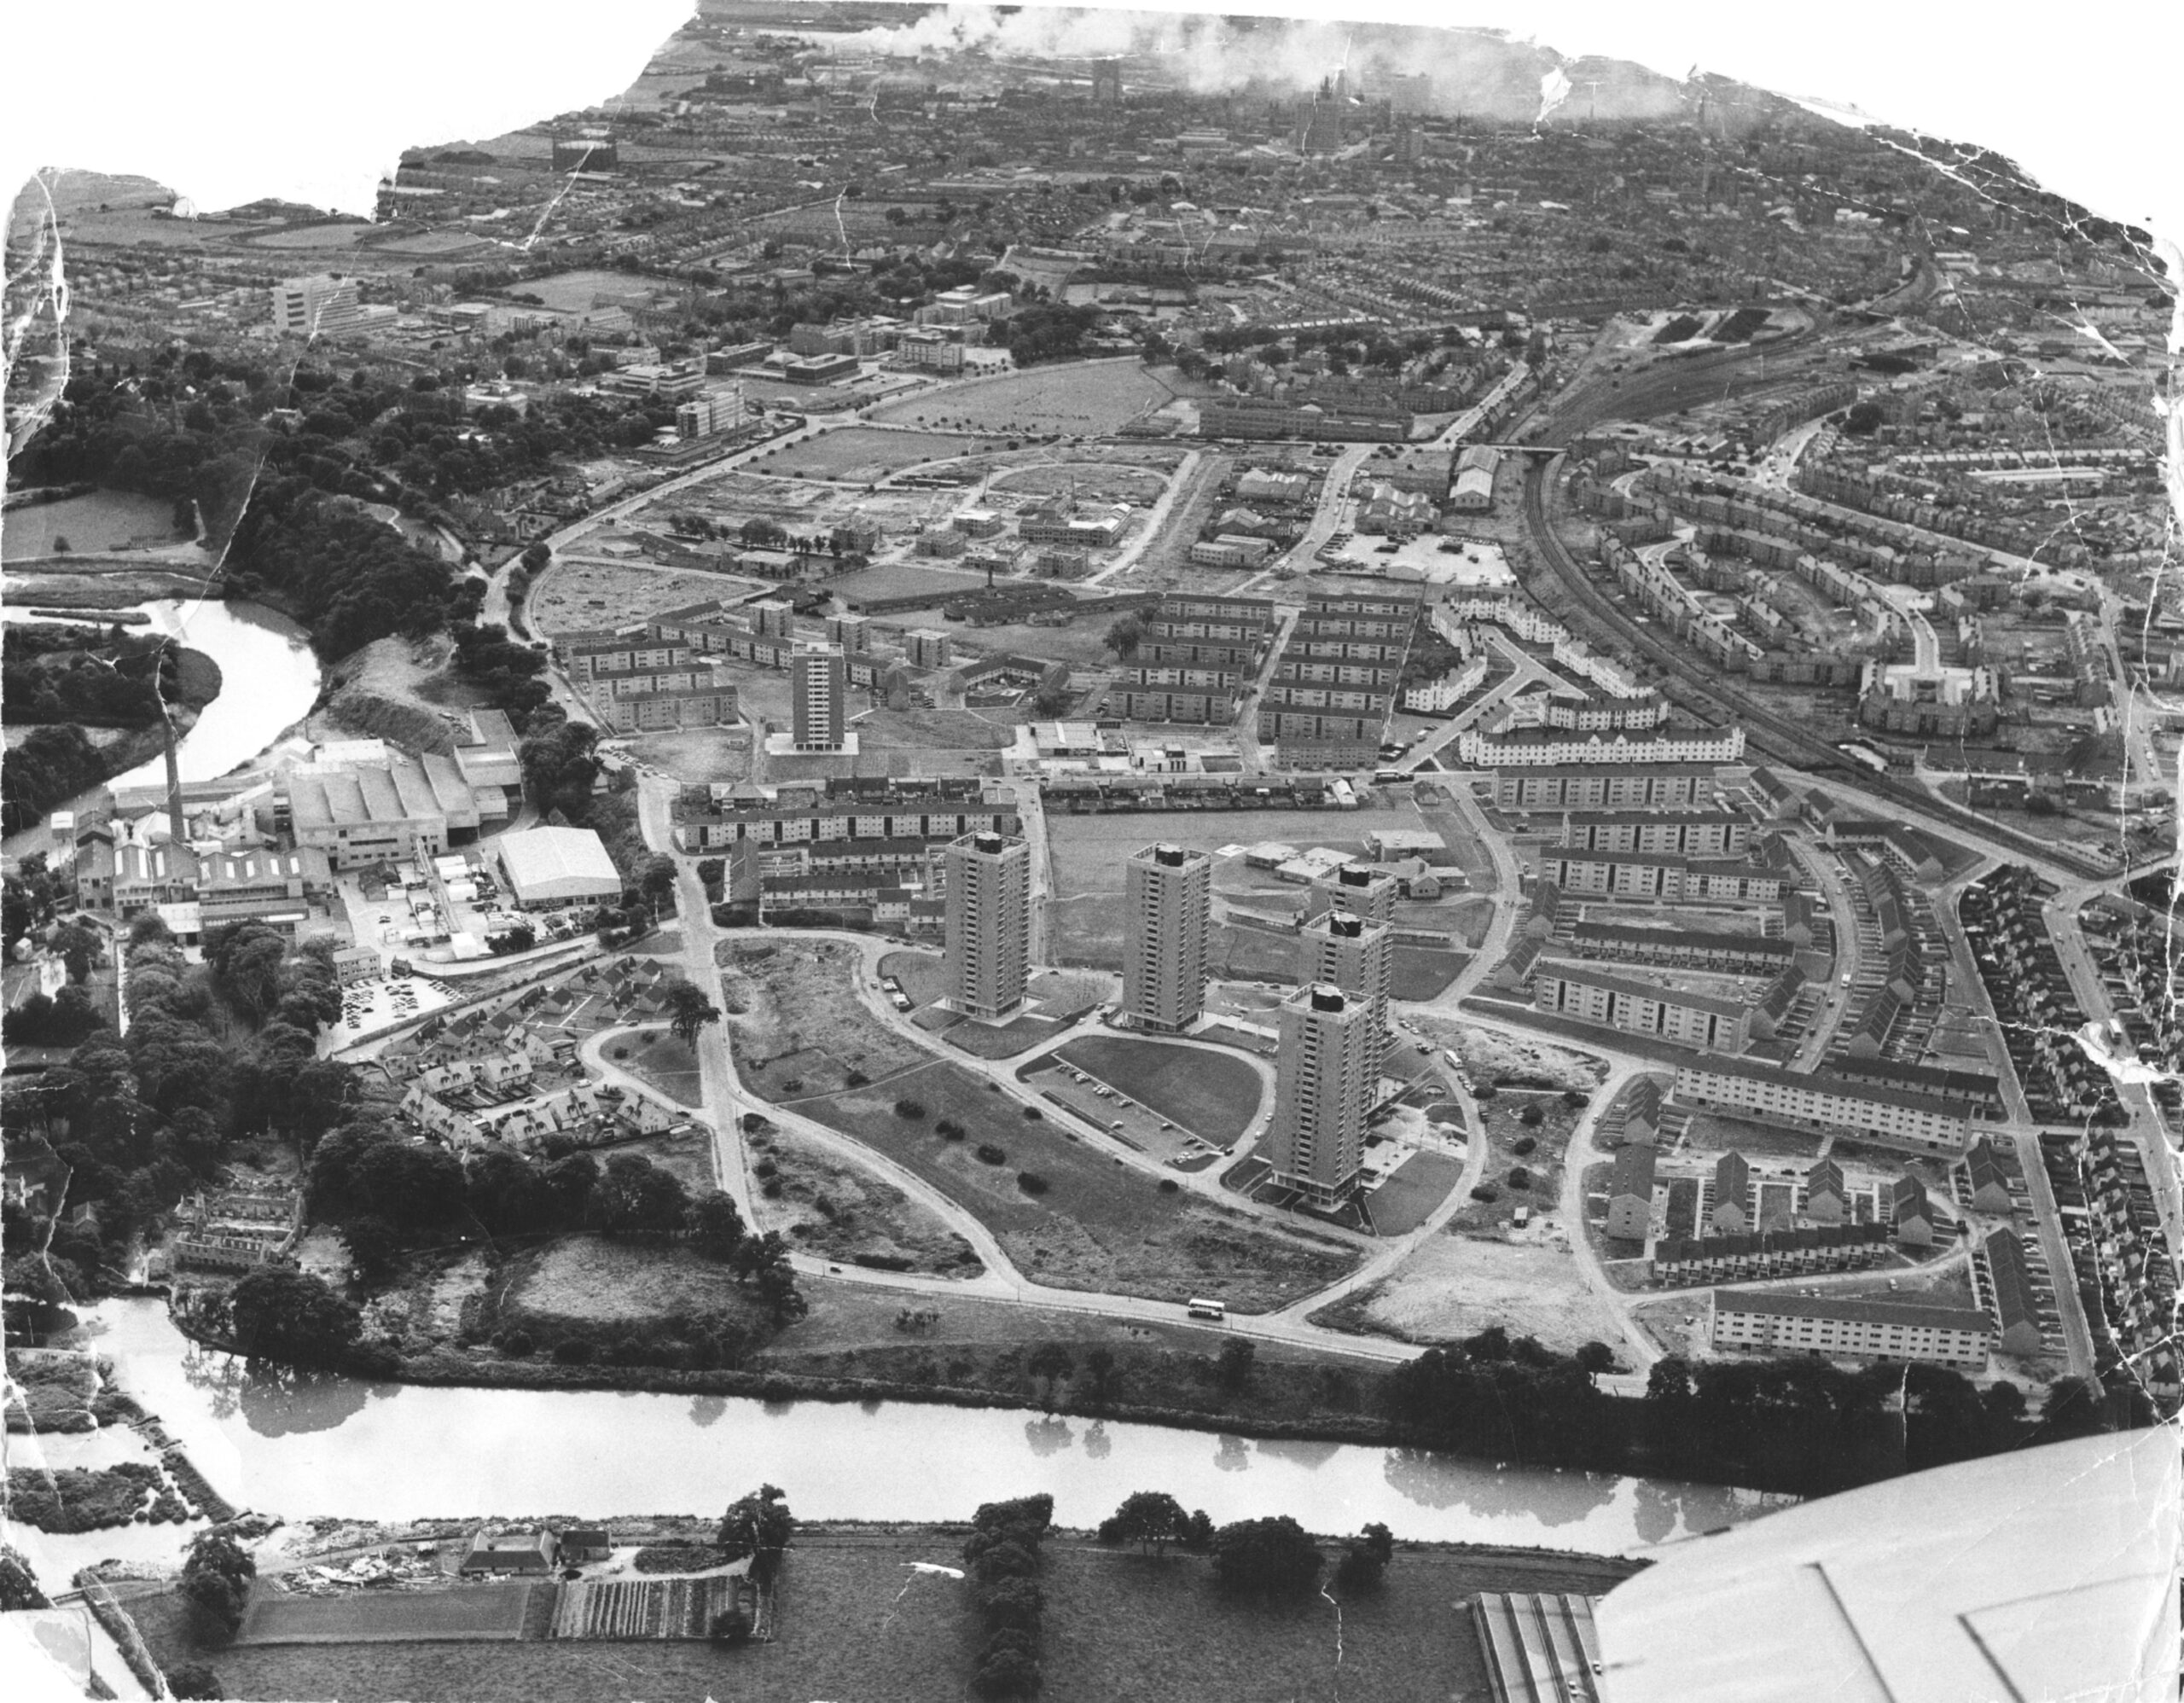 An aerial view of Tillydrone in 1969, showing the fully extent of the scheme